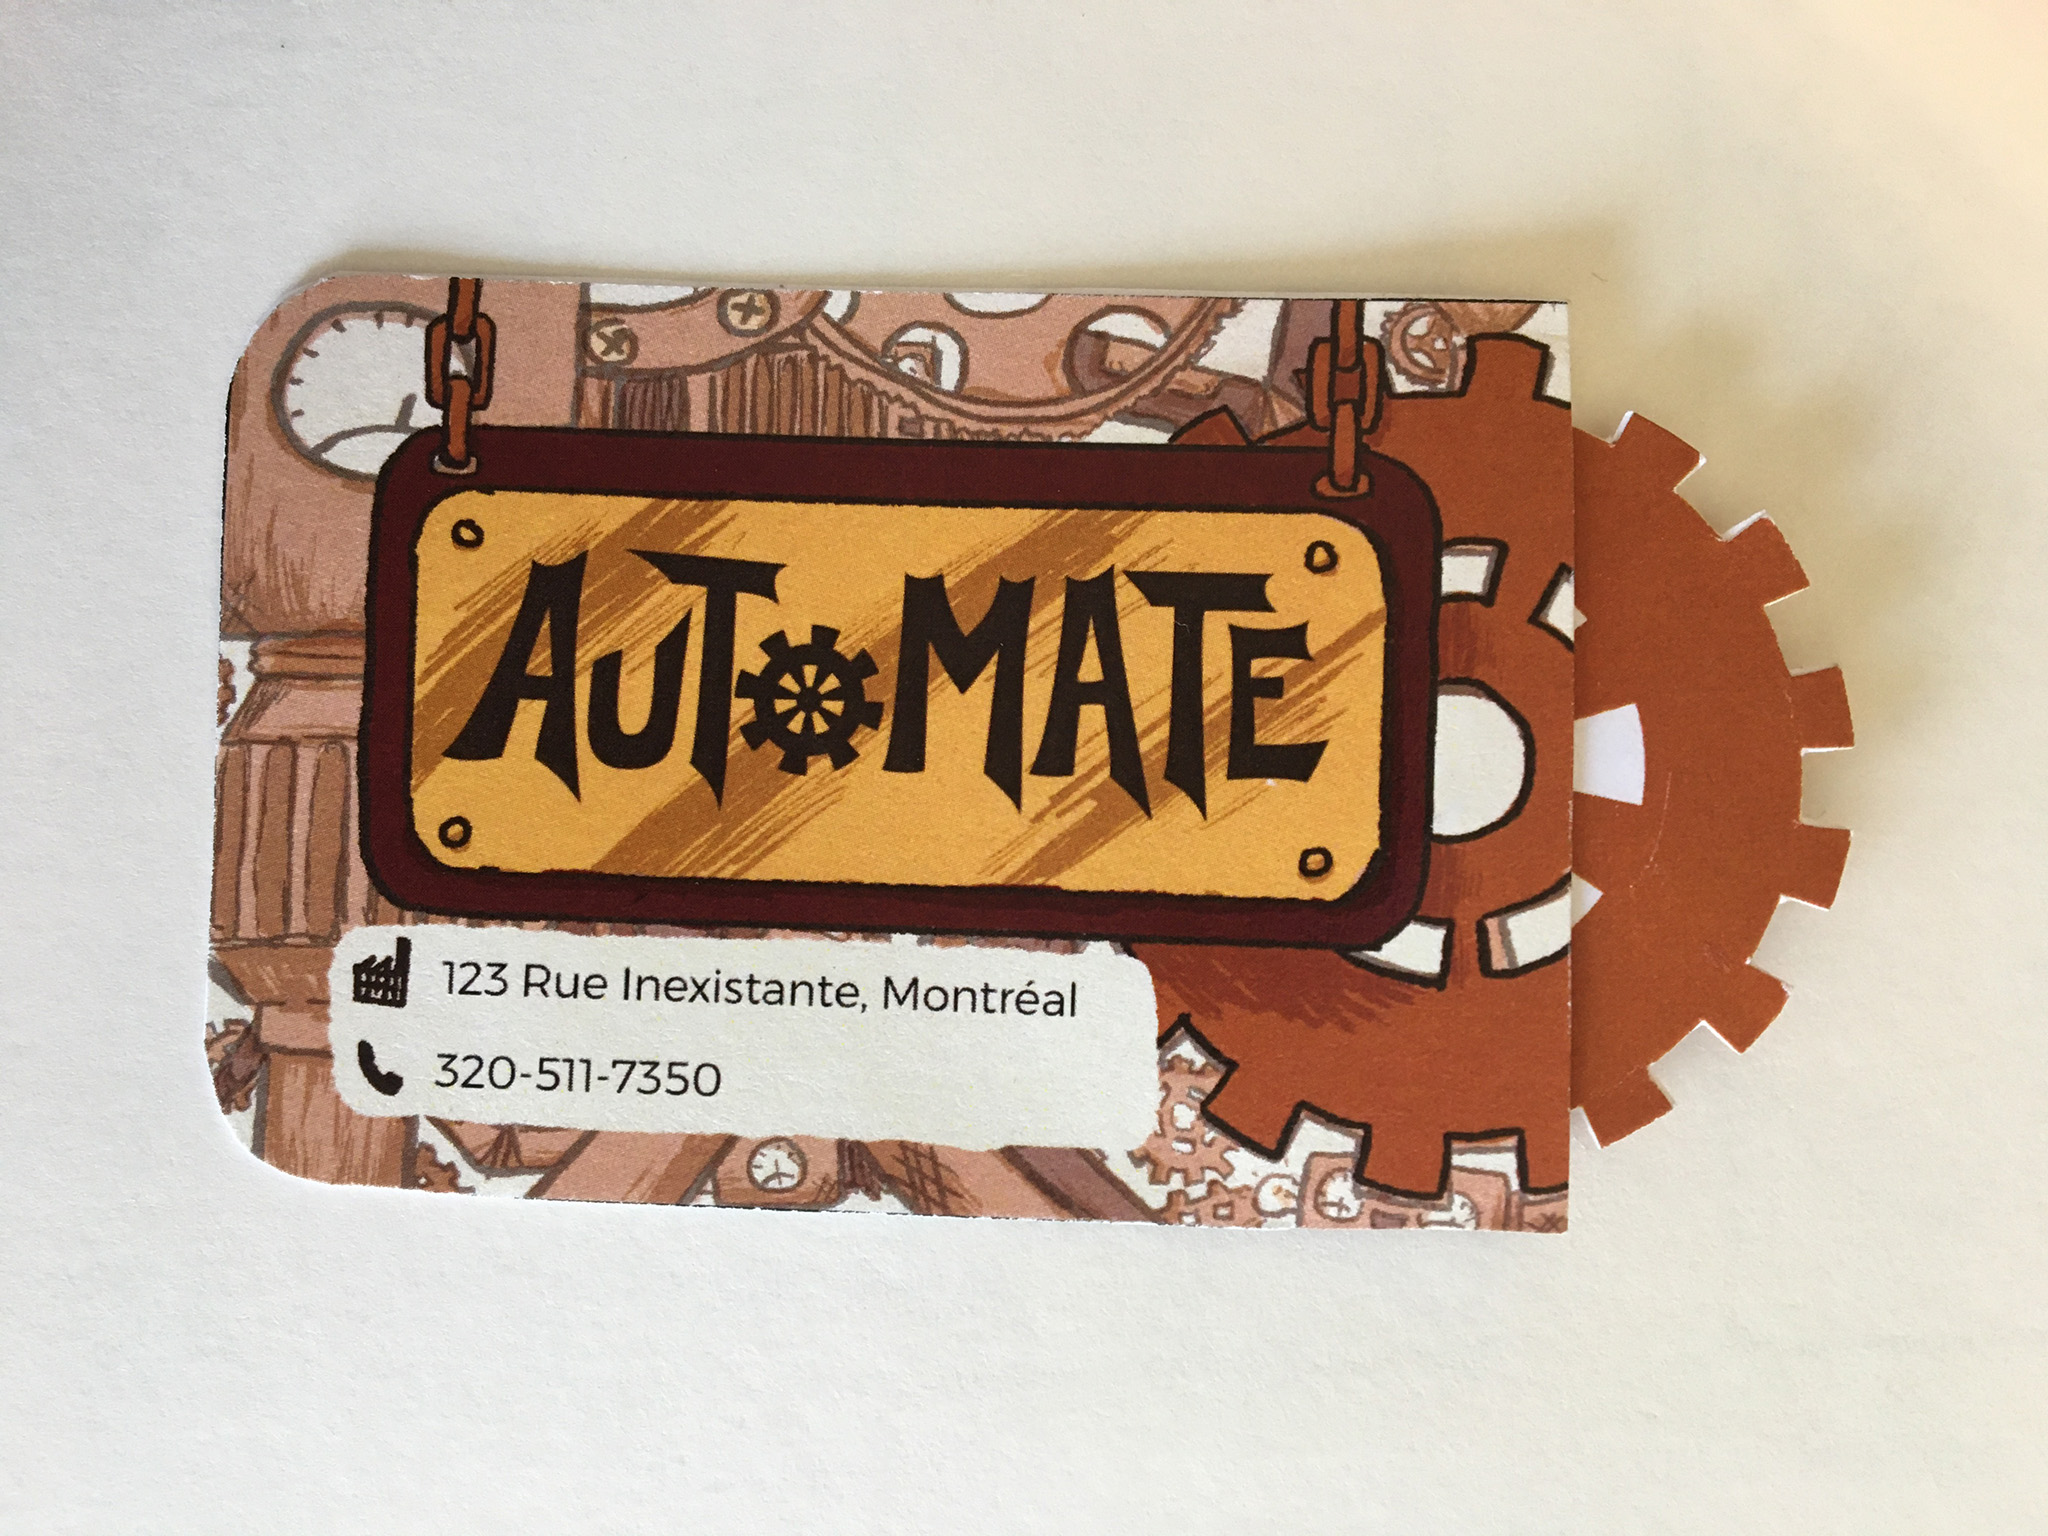 Automate's business card completed!